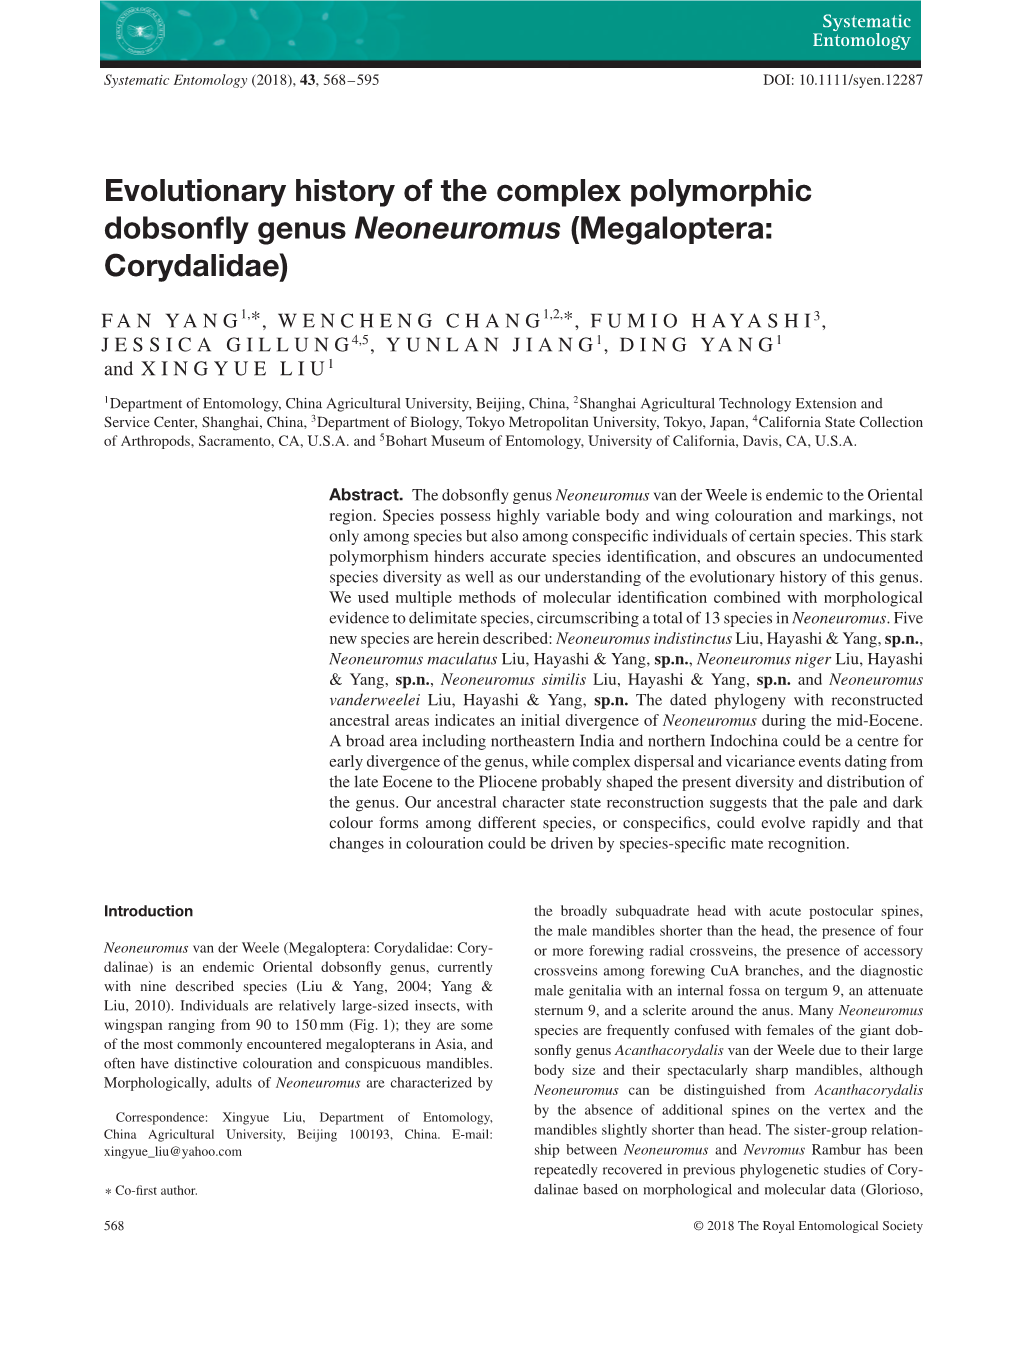 Evolutionary History of the Complex Polymorphic Dobsonfly Genus